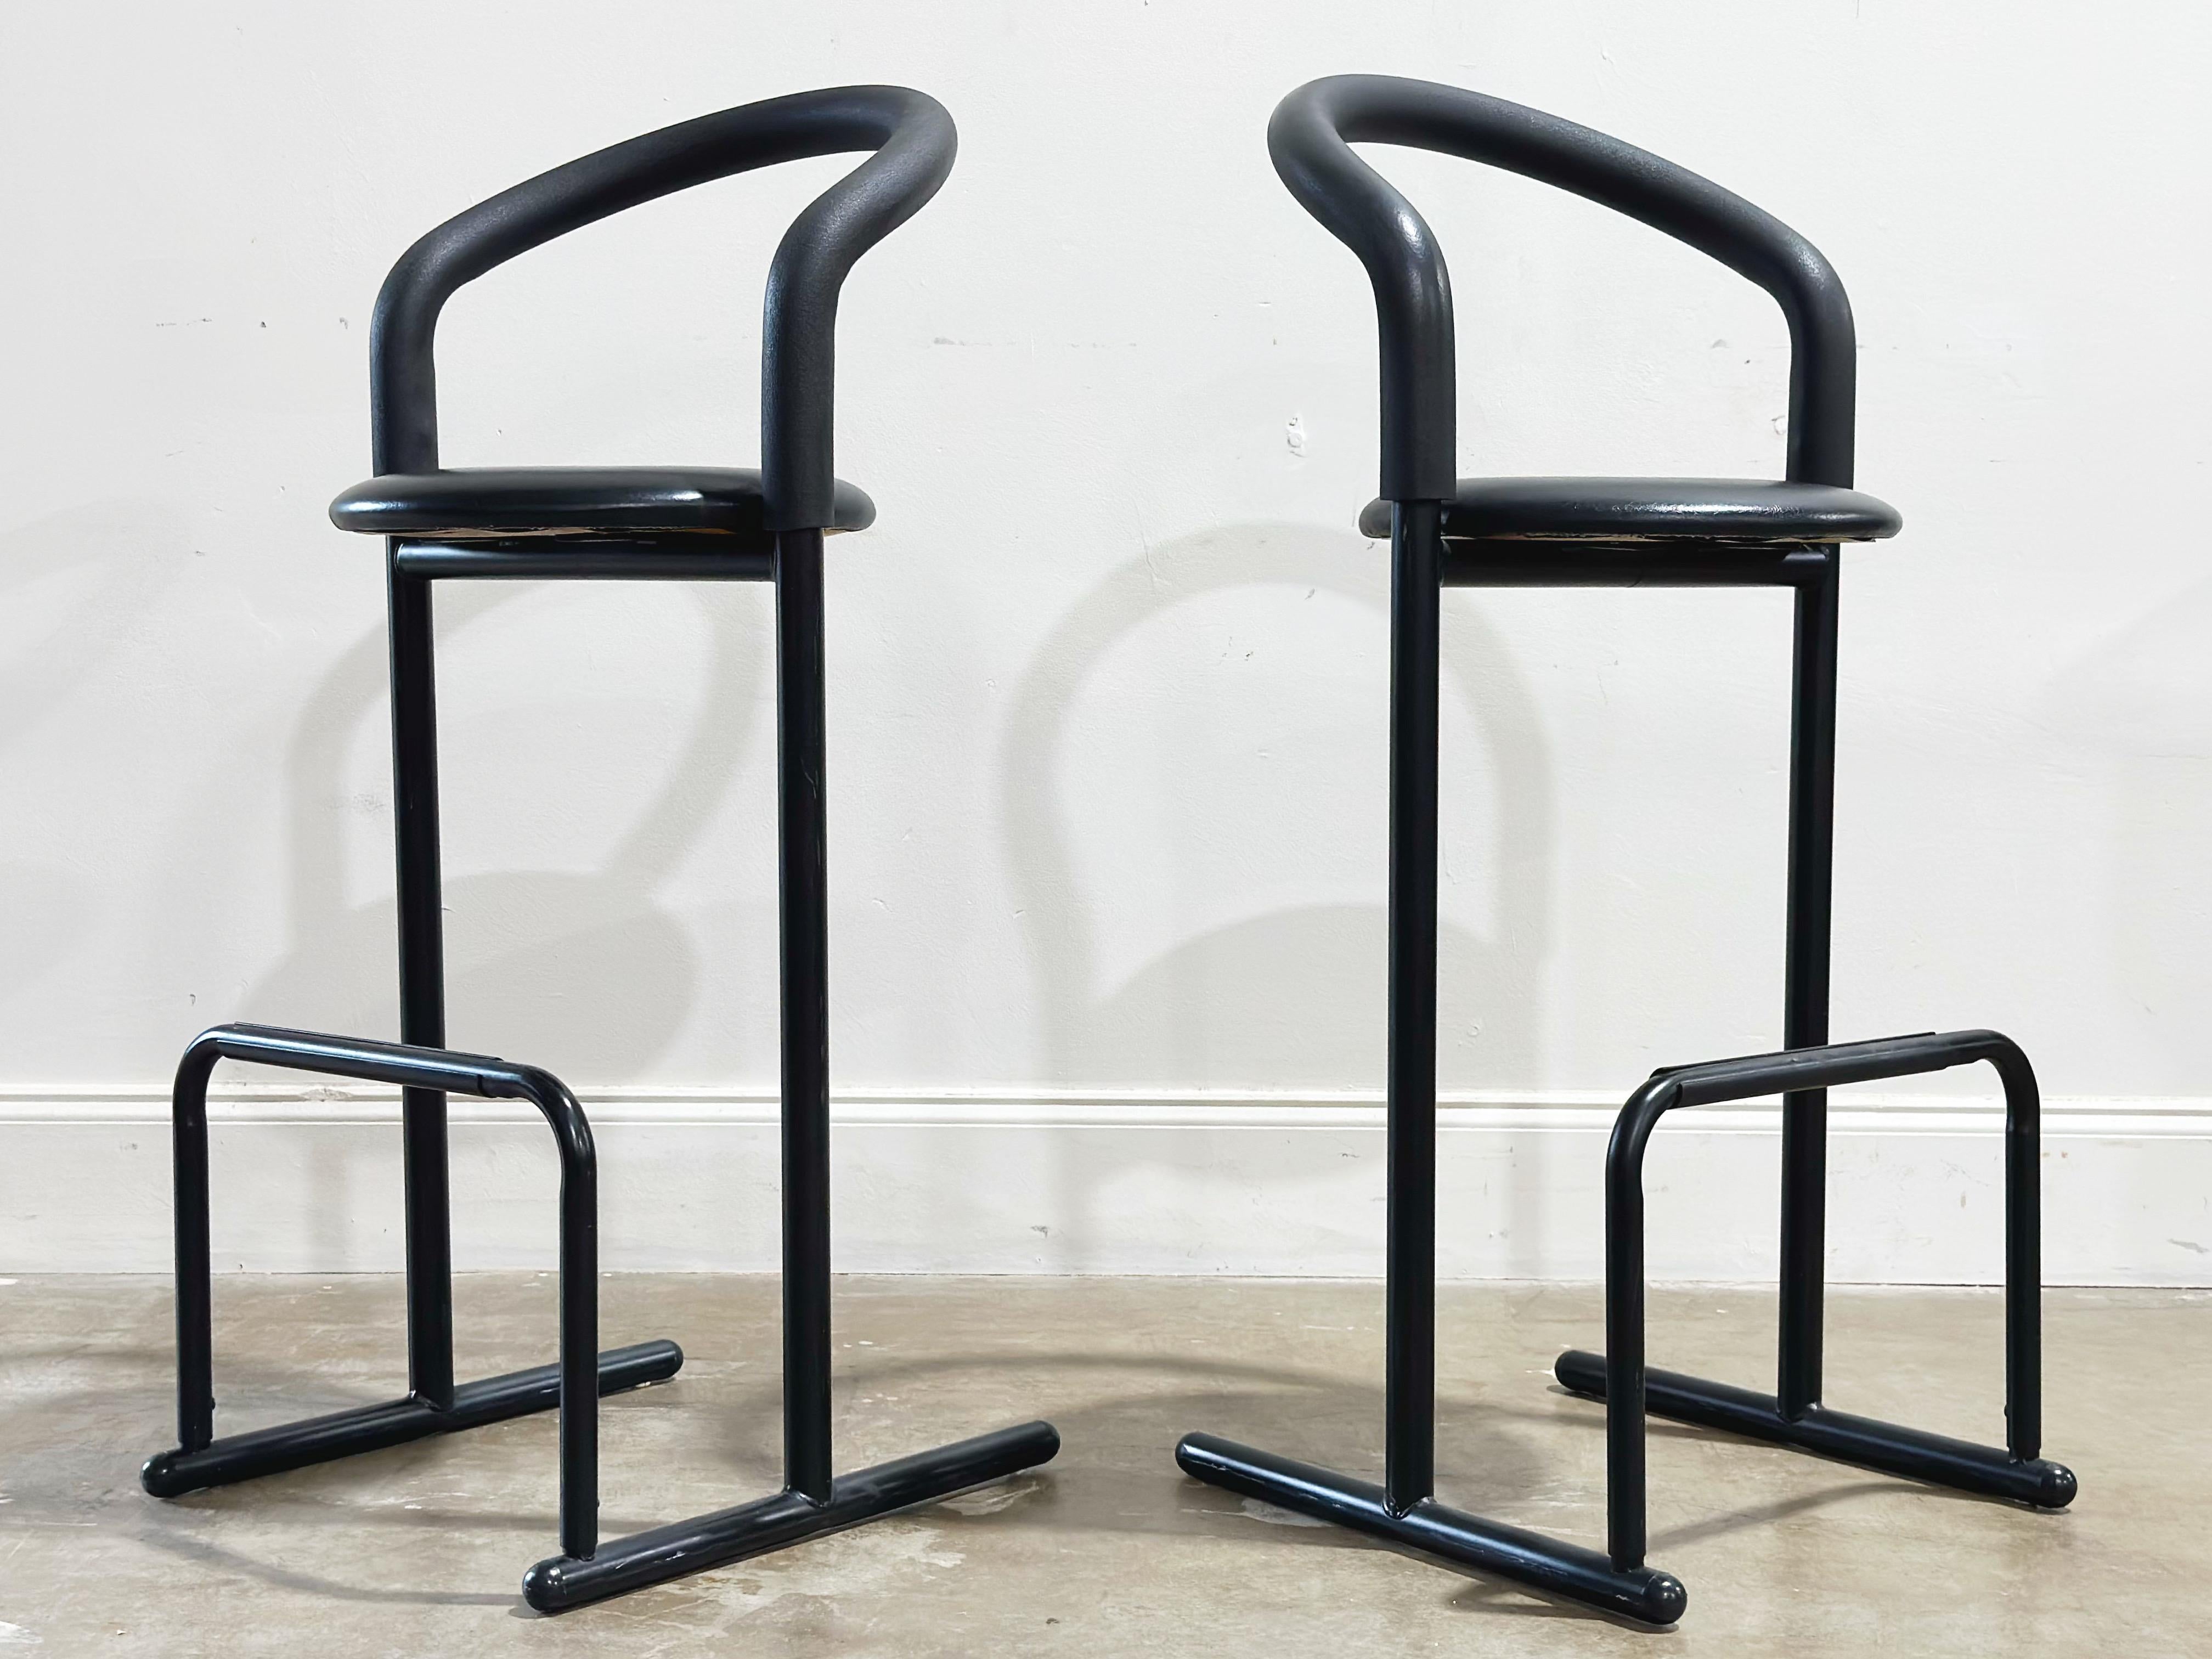 Pair of vintage post modern barstools by Les Industries Amisco - Canada circa 1980s. Bar height. Black metal frames with foam padded back/arm rests and black naugahyde seats. 
Excellent original condition - these stools look to have been hardly, if